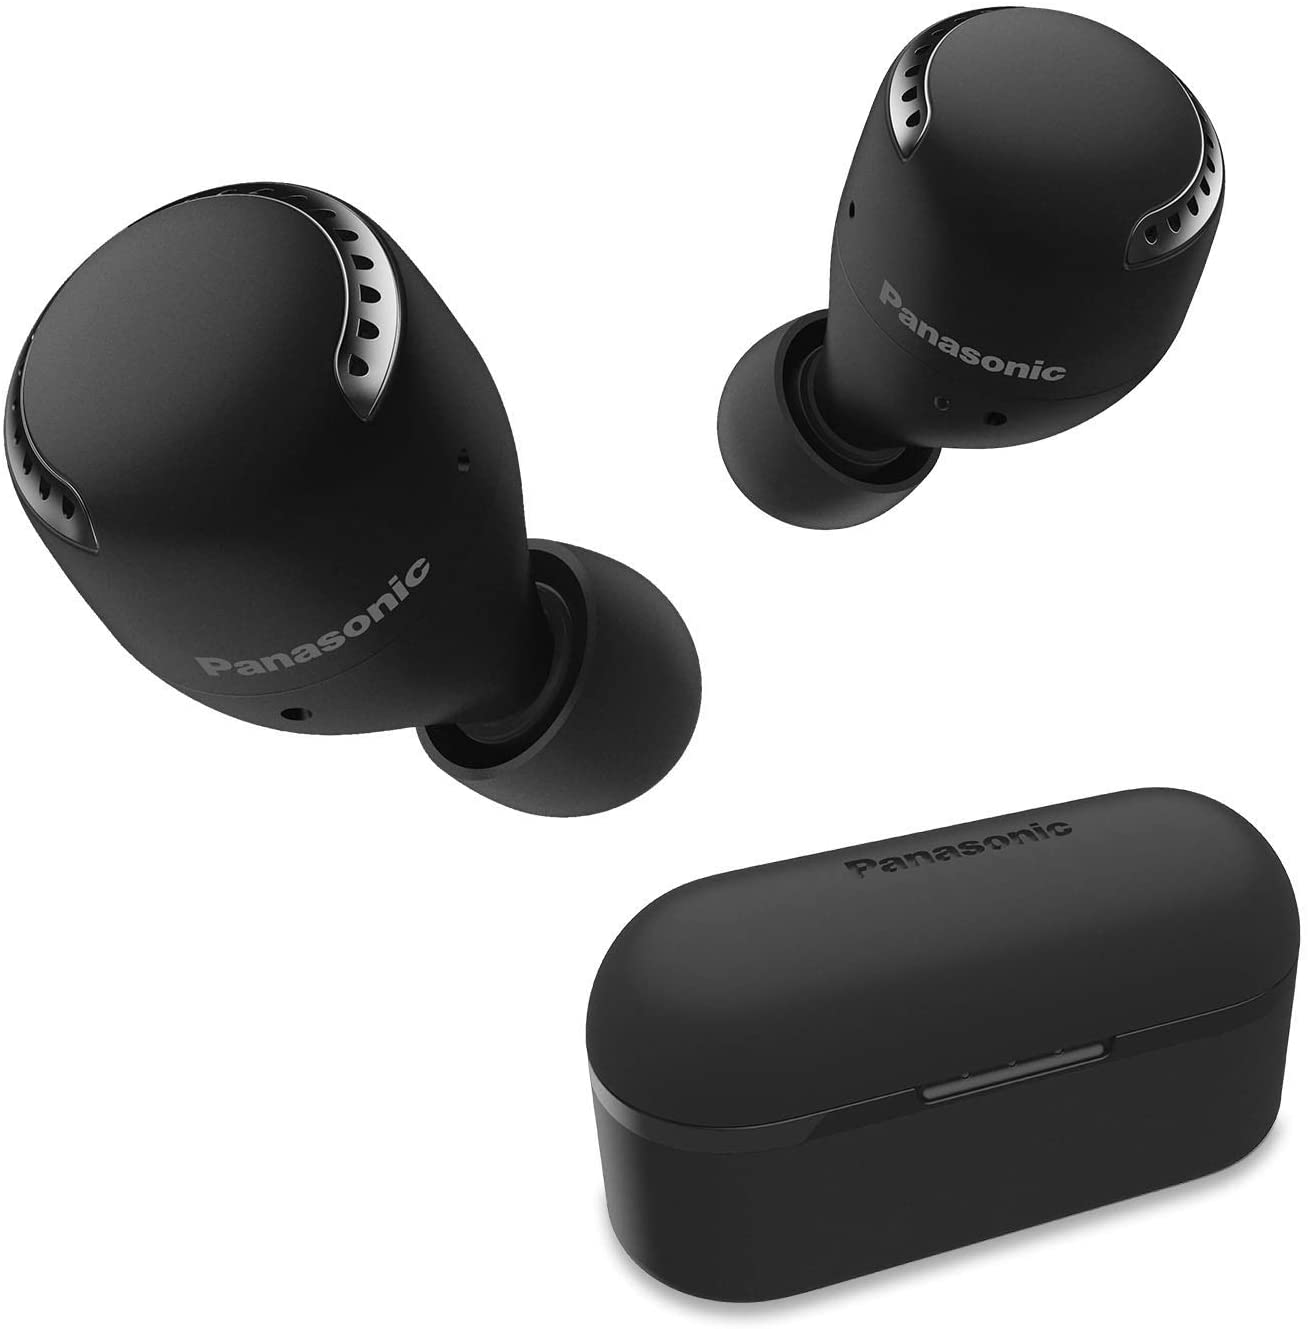 ''Panasonic True Wireless Earbuds, Noise Cancelling Bluetooth HEADPHONES, IPX4 Water Resistant and Co